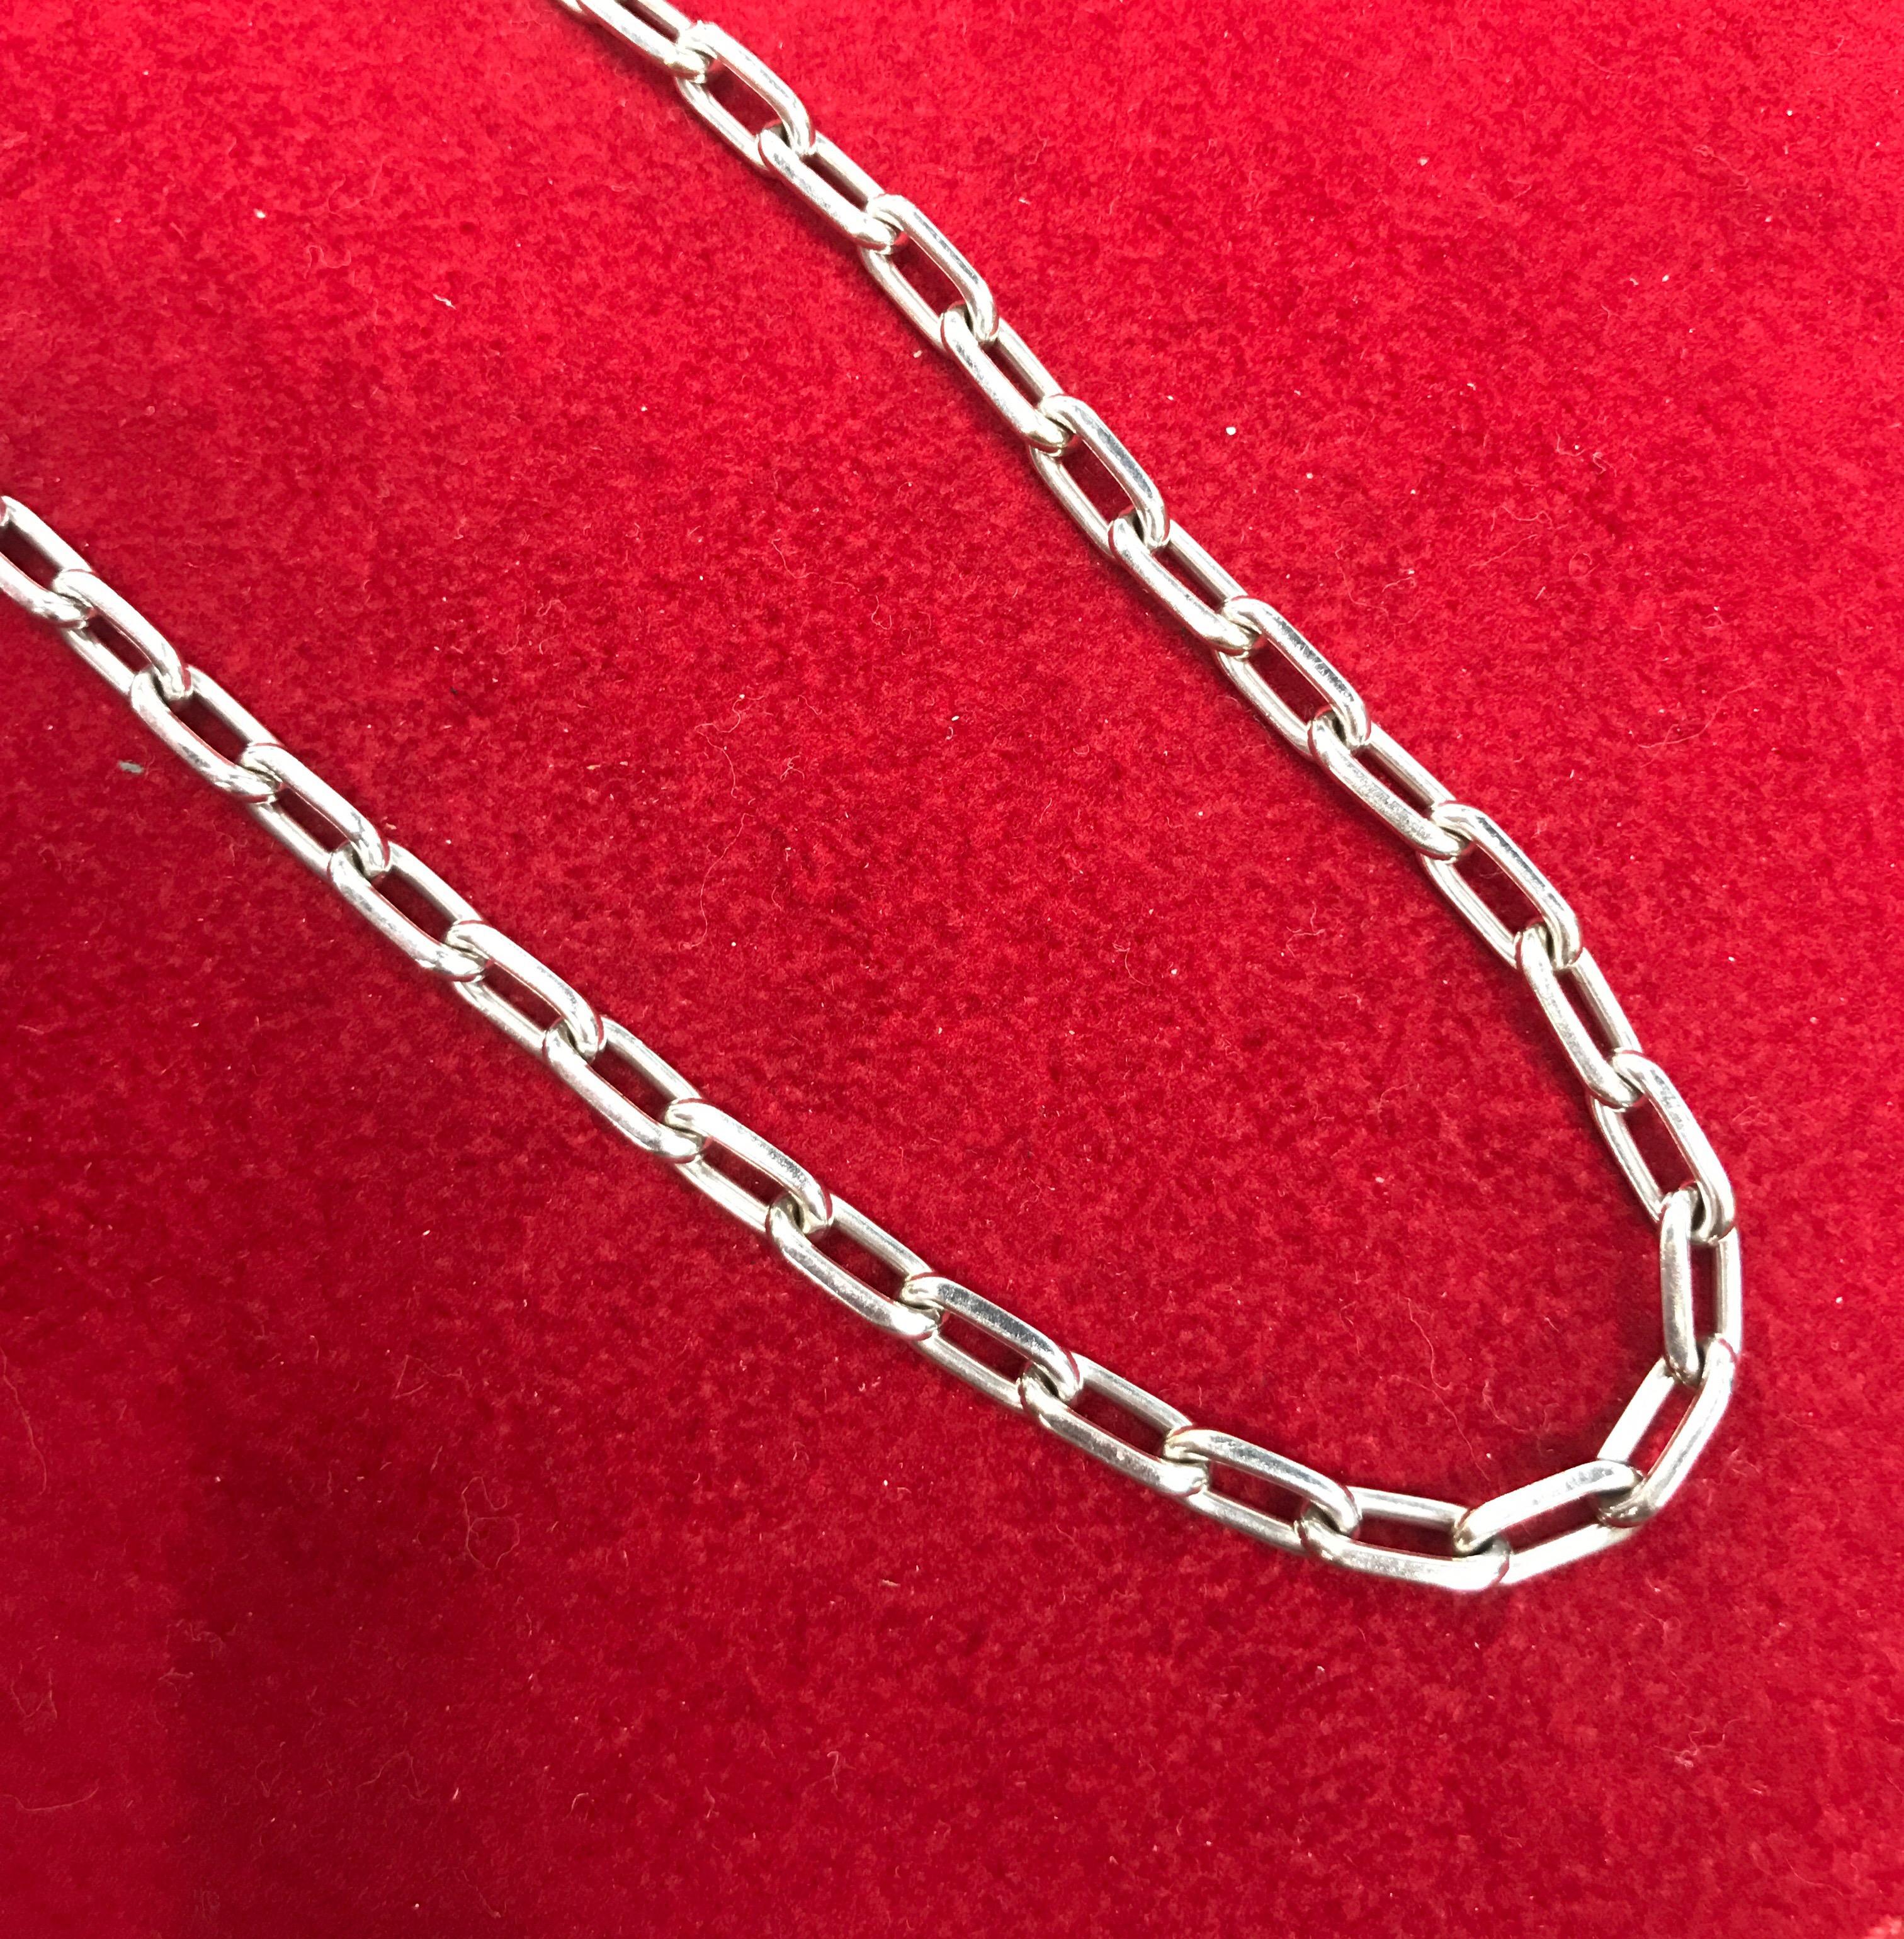 Material: 18k white gold 
Hallmark: Cartier 750 Serial
Measurements: 17 inches 
Weight: 33.5 grams

Comes with Cartier pouch.
Will buff it up before shipping so it looks brand new. 

This is a bold and beautiful authentic necklace by Cartier from